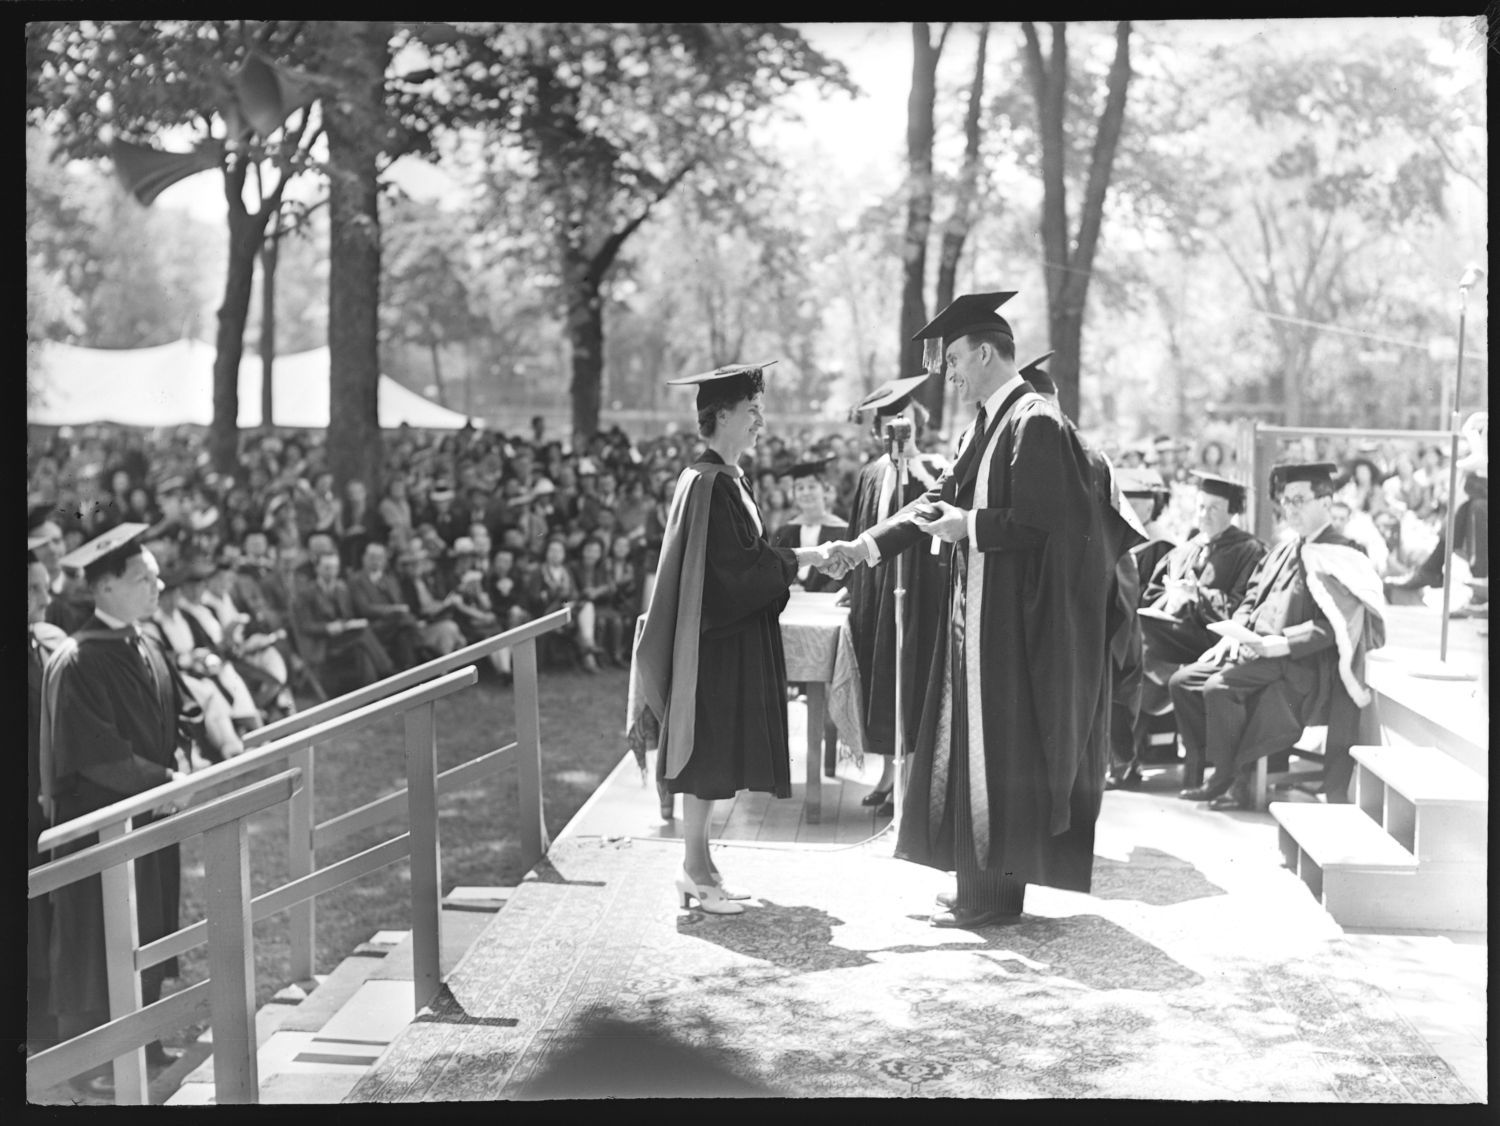 A woman in a cap and gown for graduation shaking hands with a university official